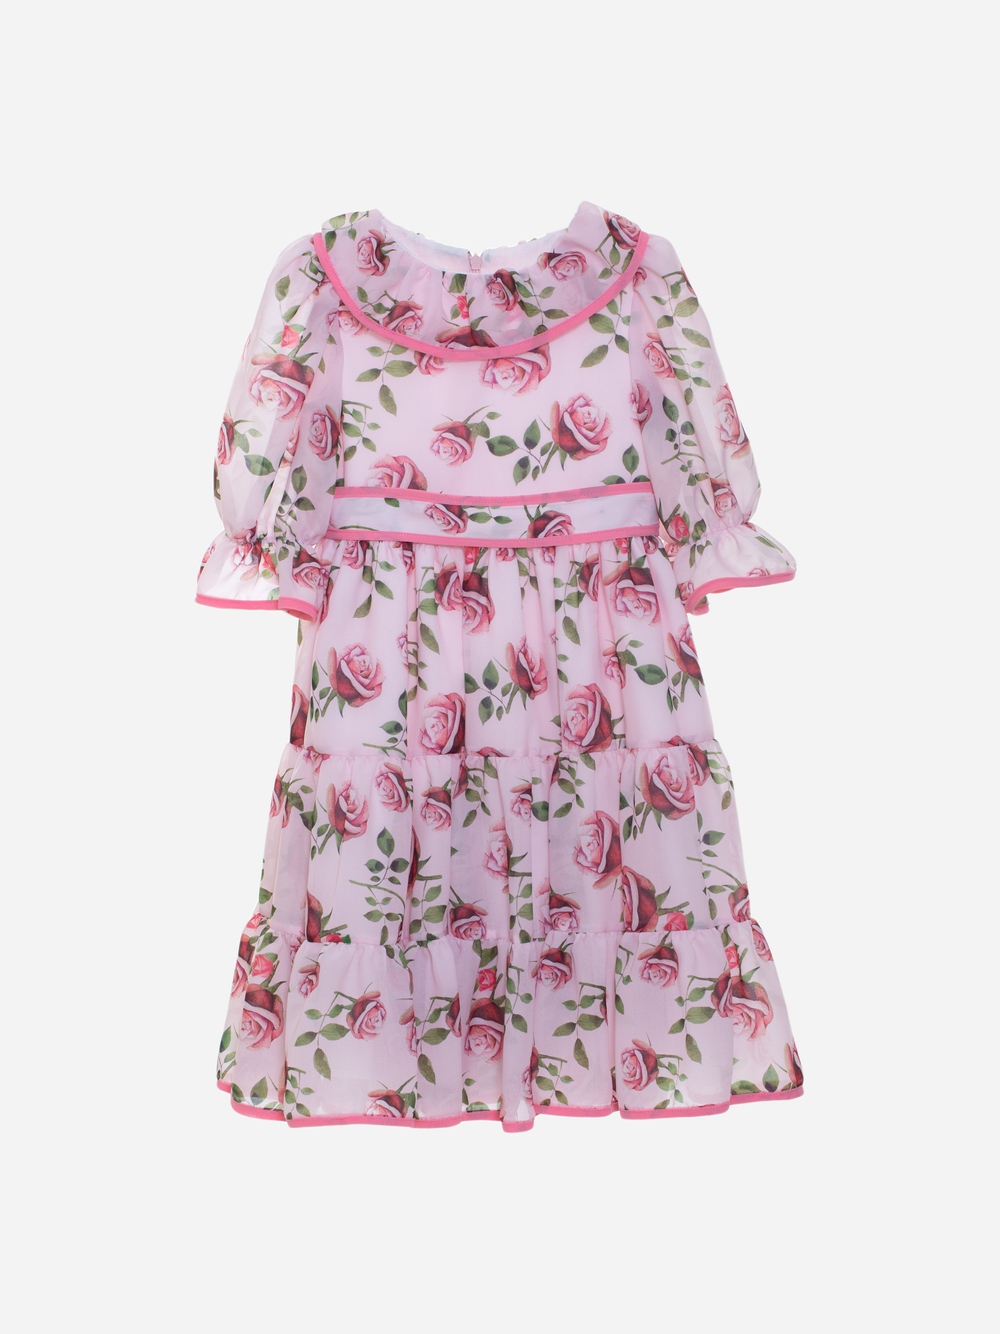 Girls dress with exclusive rose print